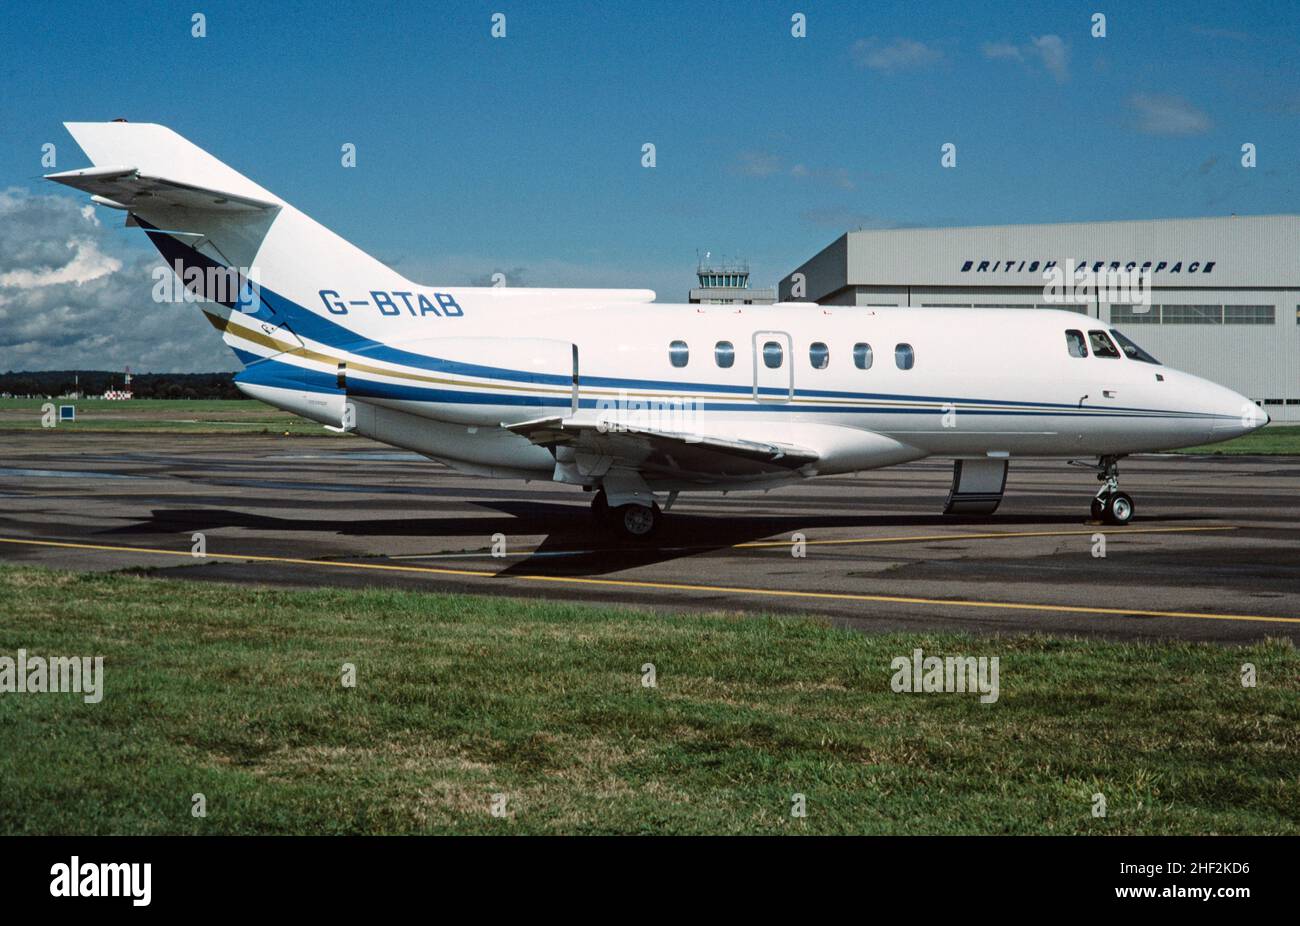 A Hawker Siddeley, British Aerospace 125 800B Business Executive Jet at Hatfield Airport in England in 1989. Registration number G-BTAB. Stock Photo